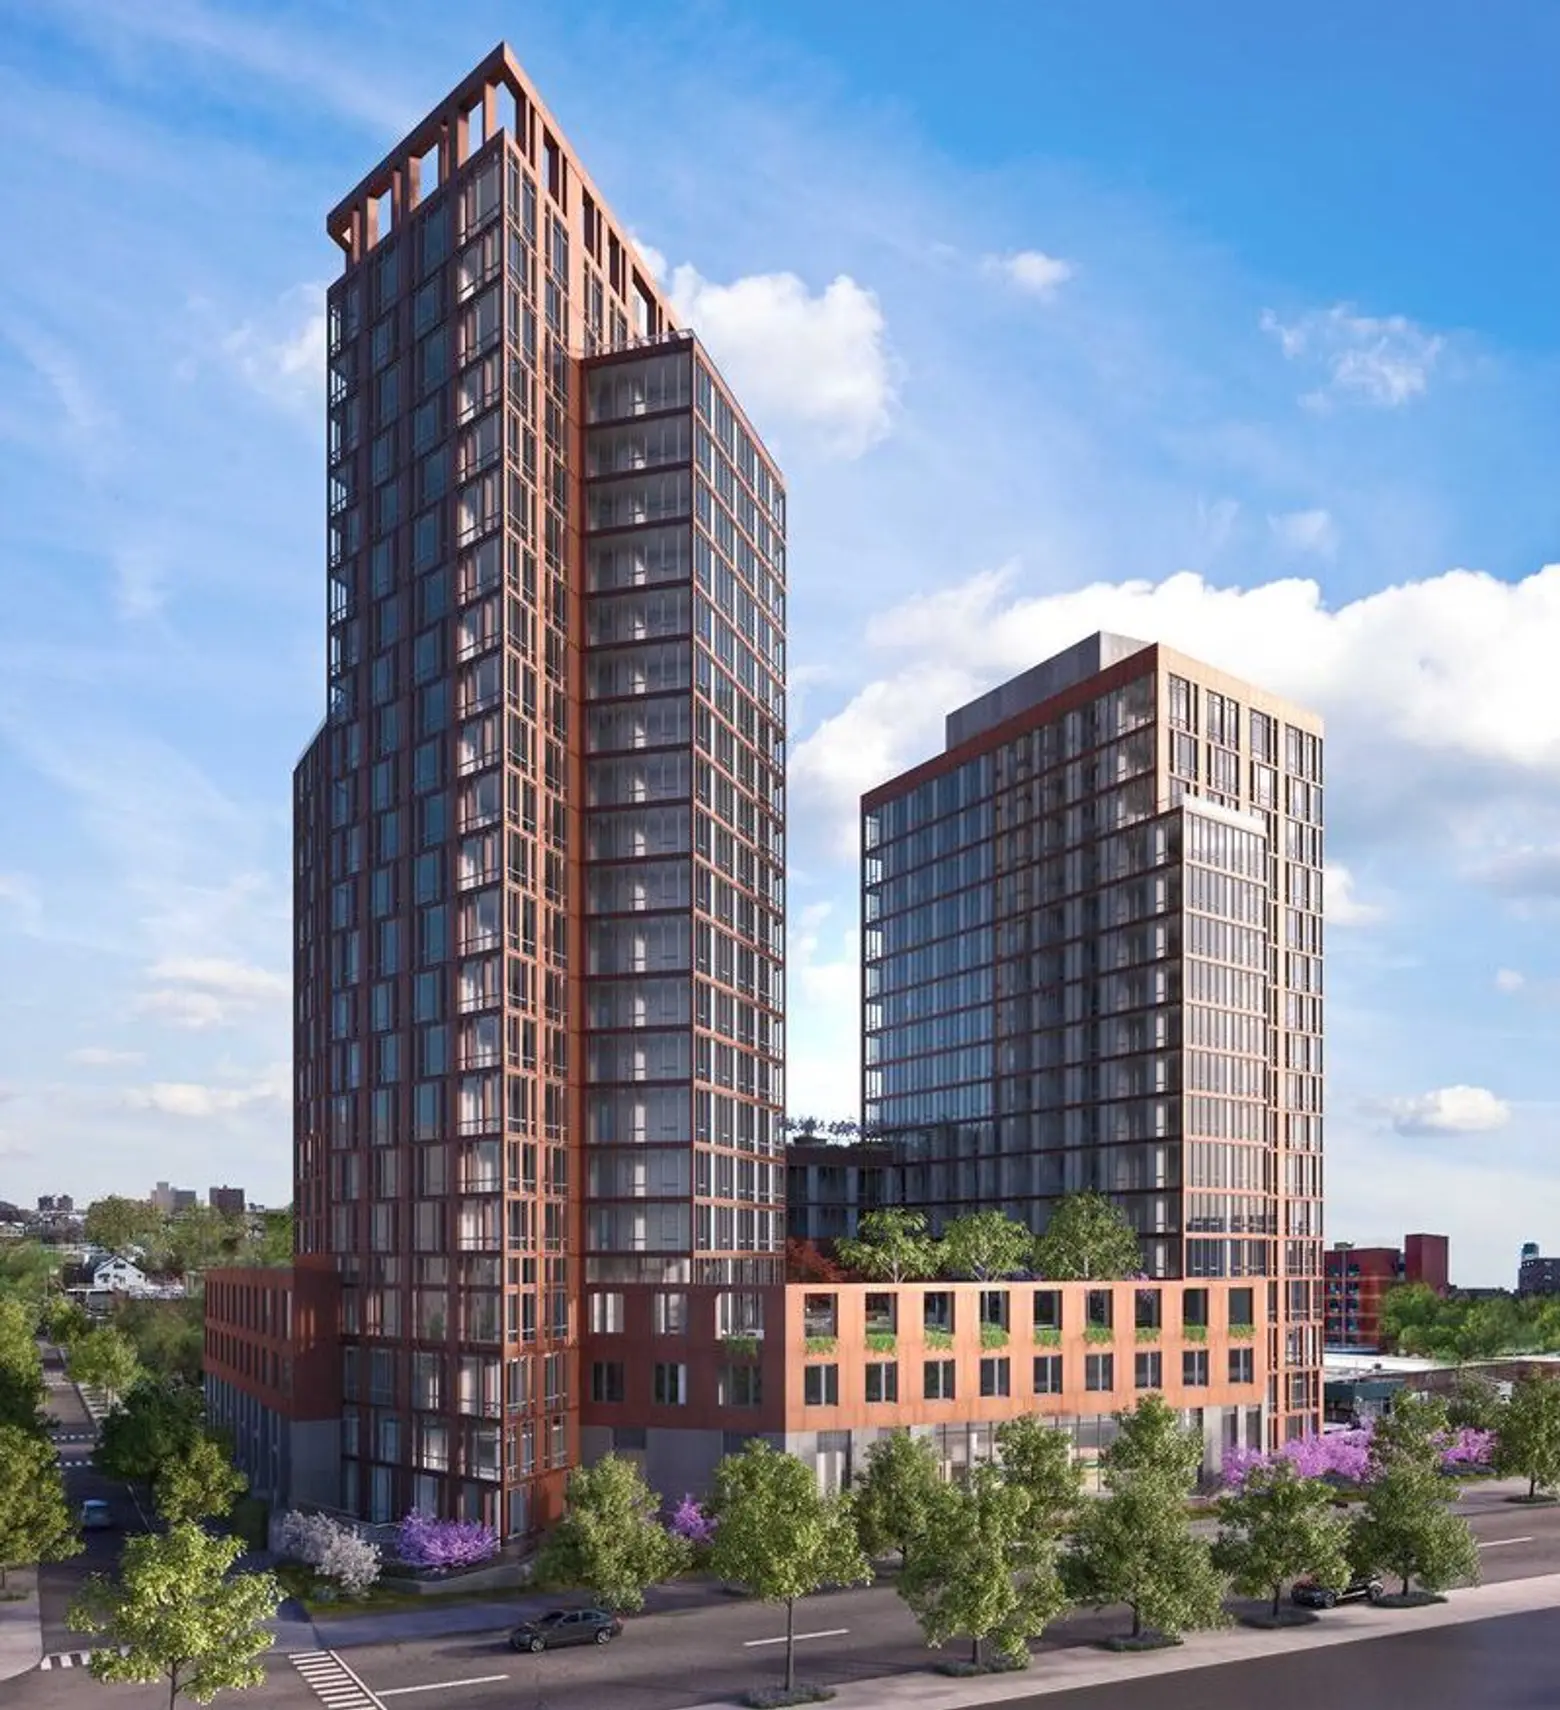 Before its summer kickoff, new renderings for Halletts Point’s first rental